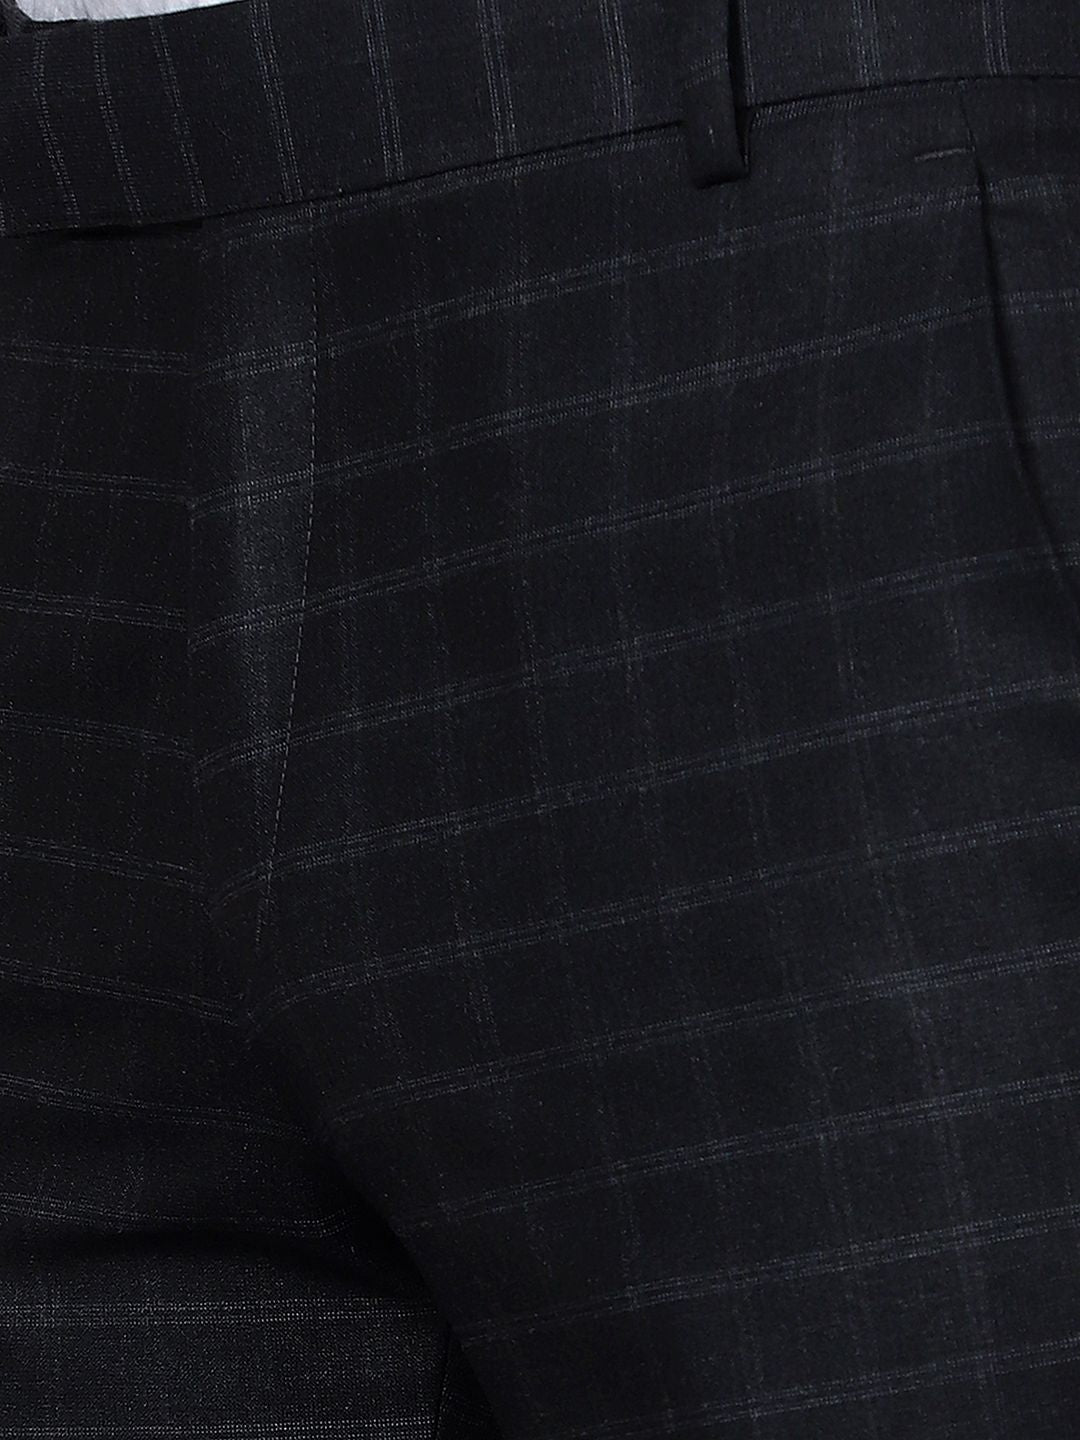 Checkered  slim fit trousers Black